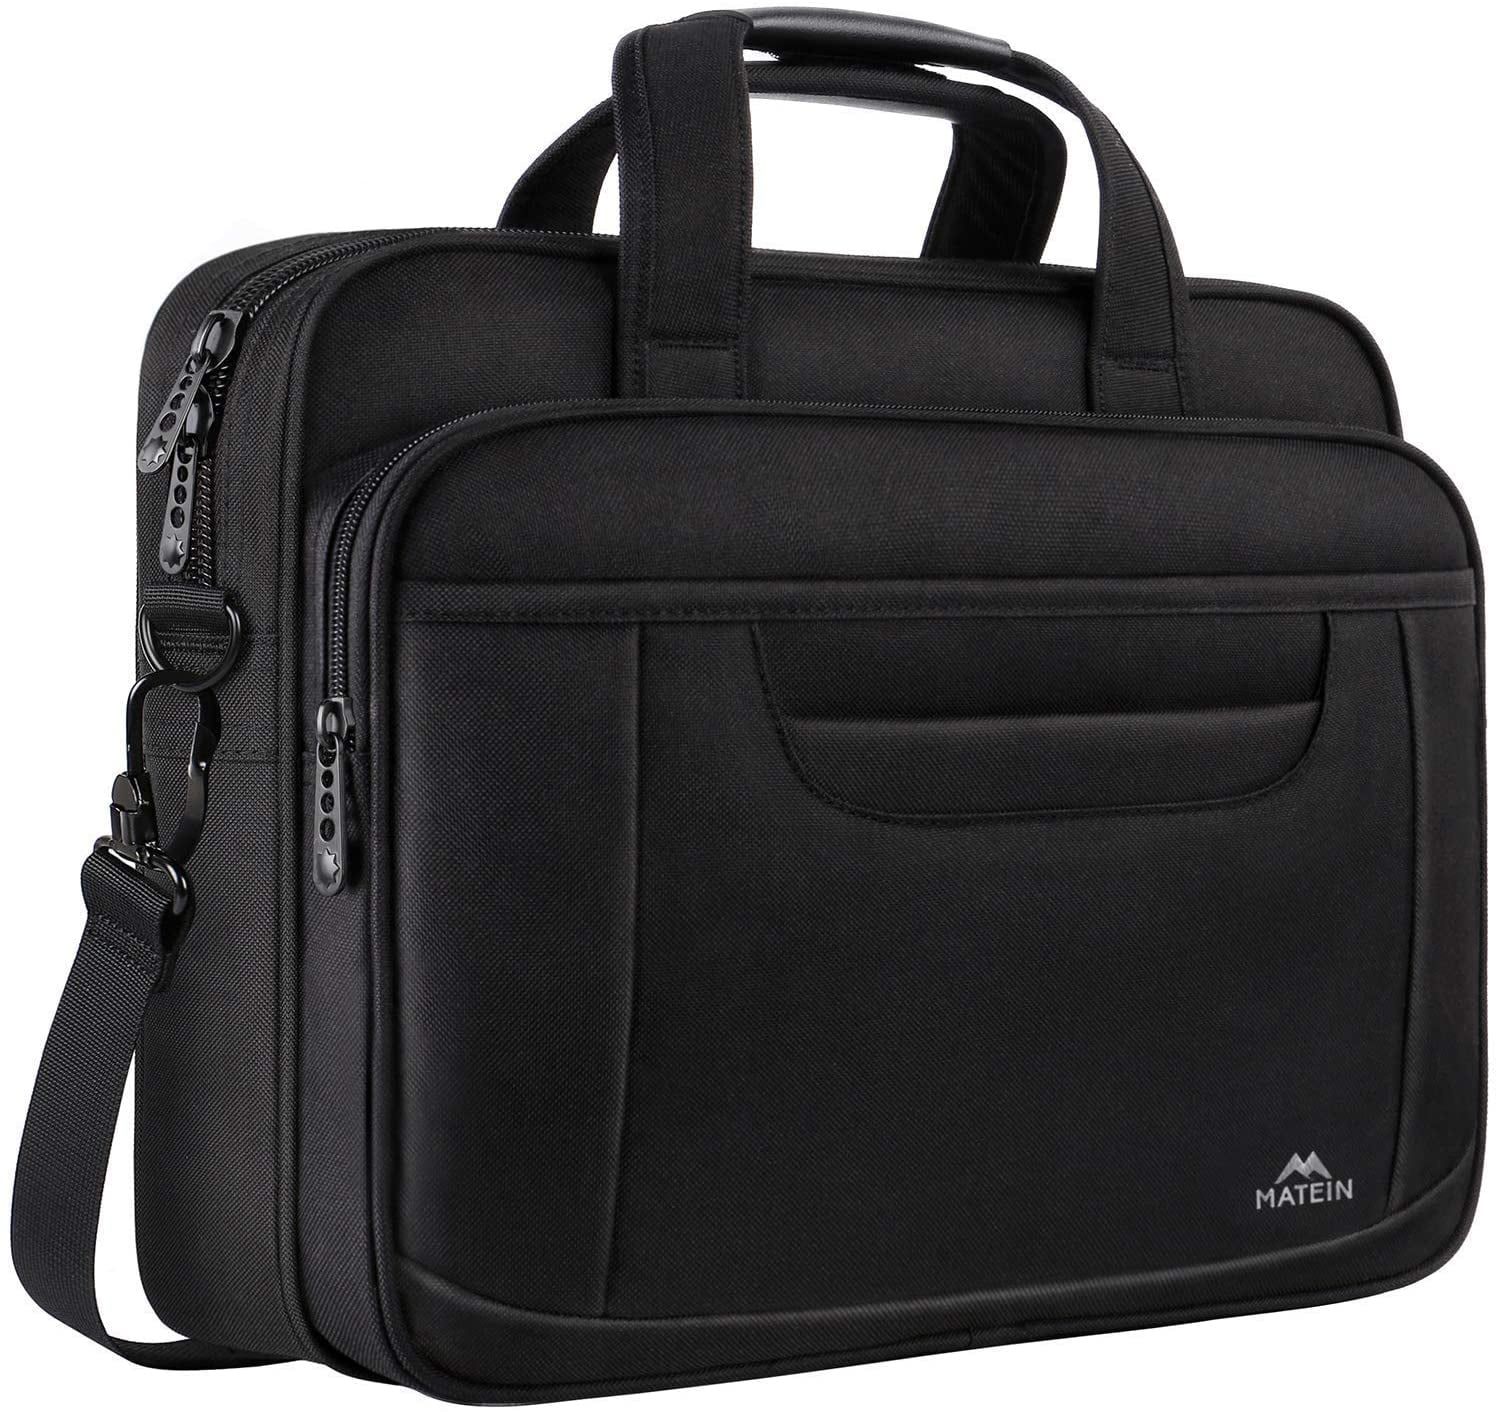 Mens Briefcase Mens Leather Travel Carry On Bags Holdal Travel Tote Water Waterproof Messenger Bag Laptop Rucksack for 14 Notebook/Computer 2 Colors Business Briefcase Color : Black 